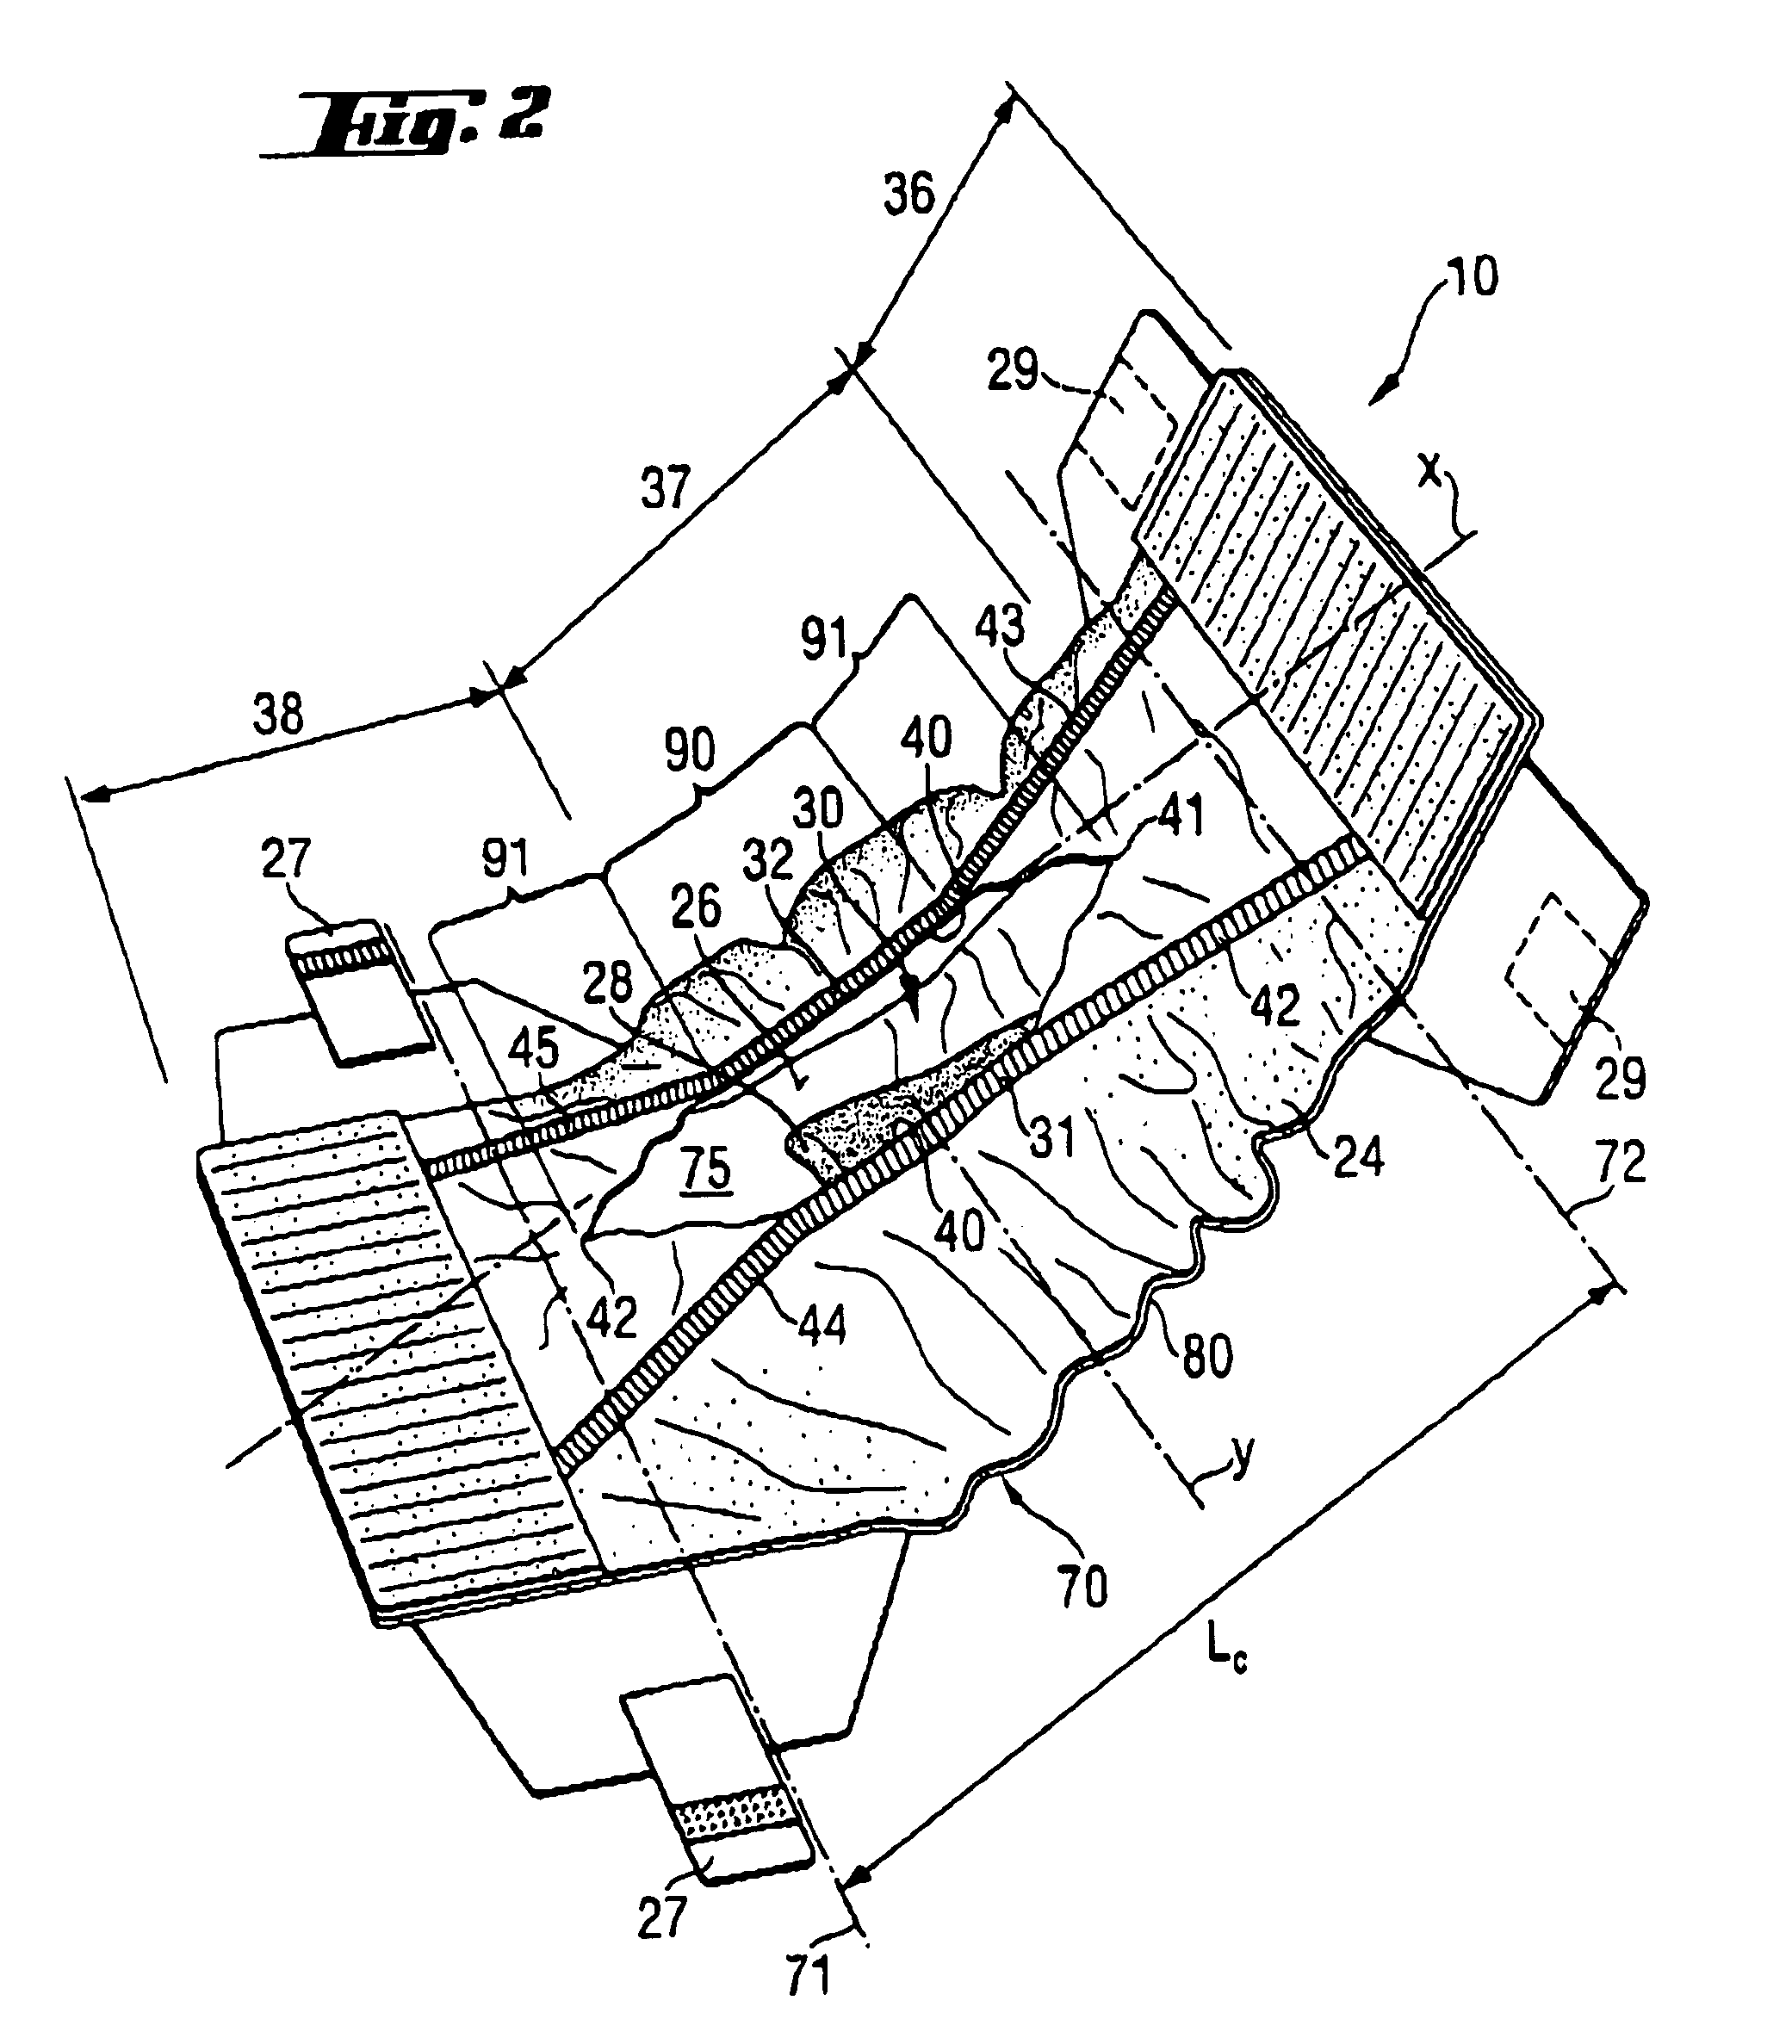 Disposable absorbent articles with masking topsheet having one or more openings providing a passageway to a void space